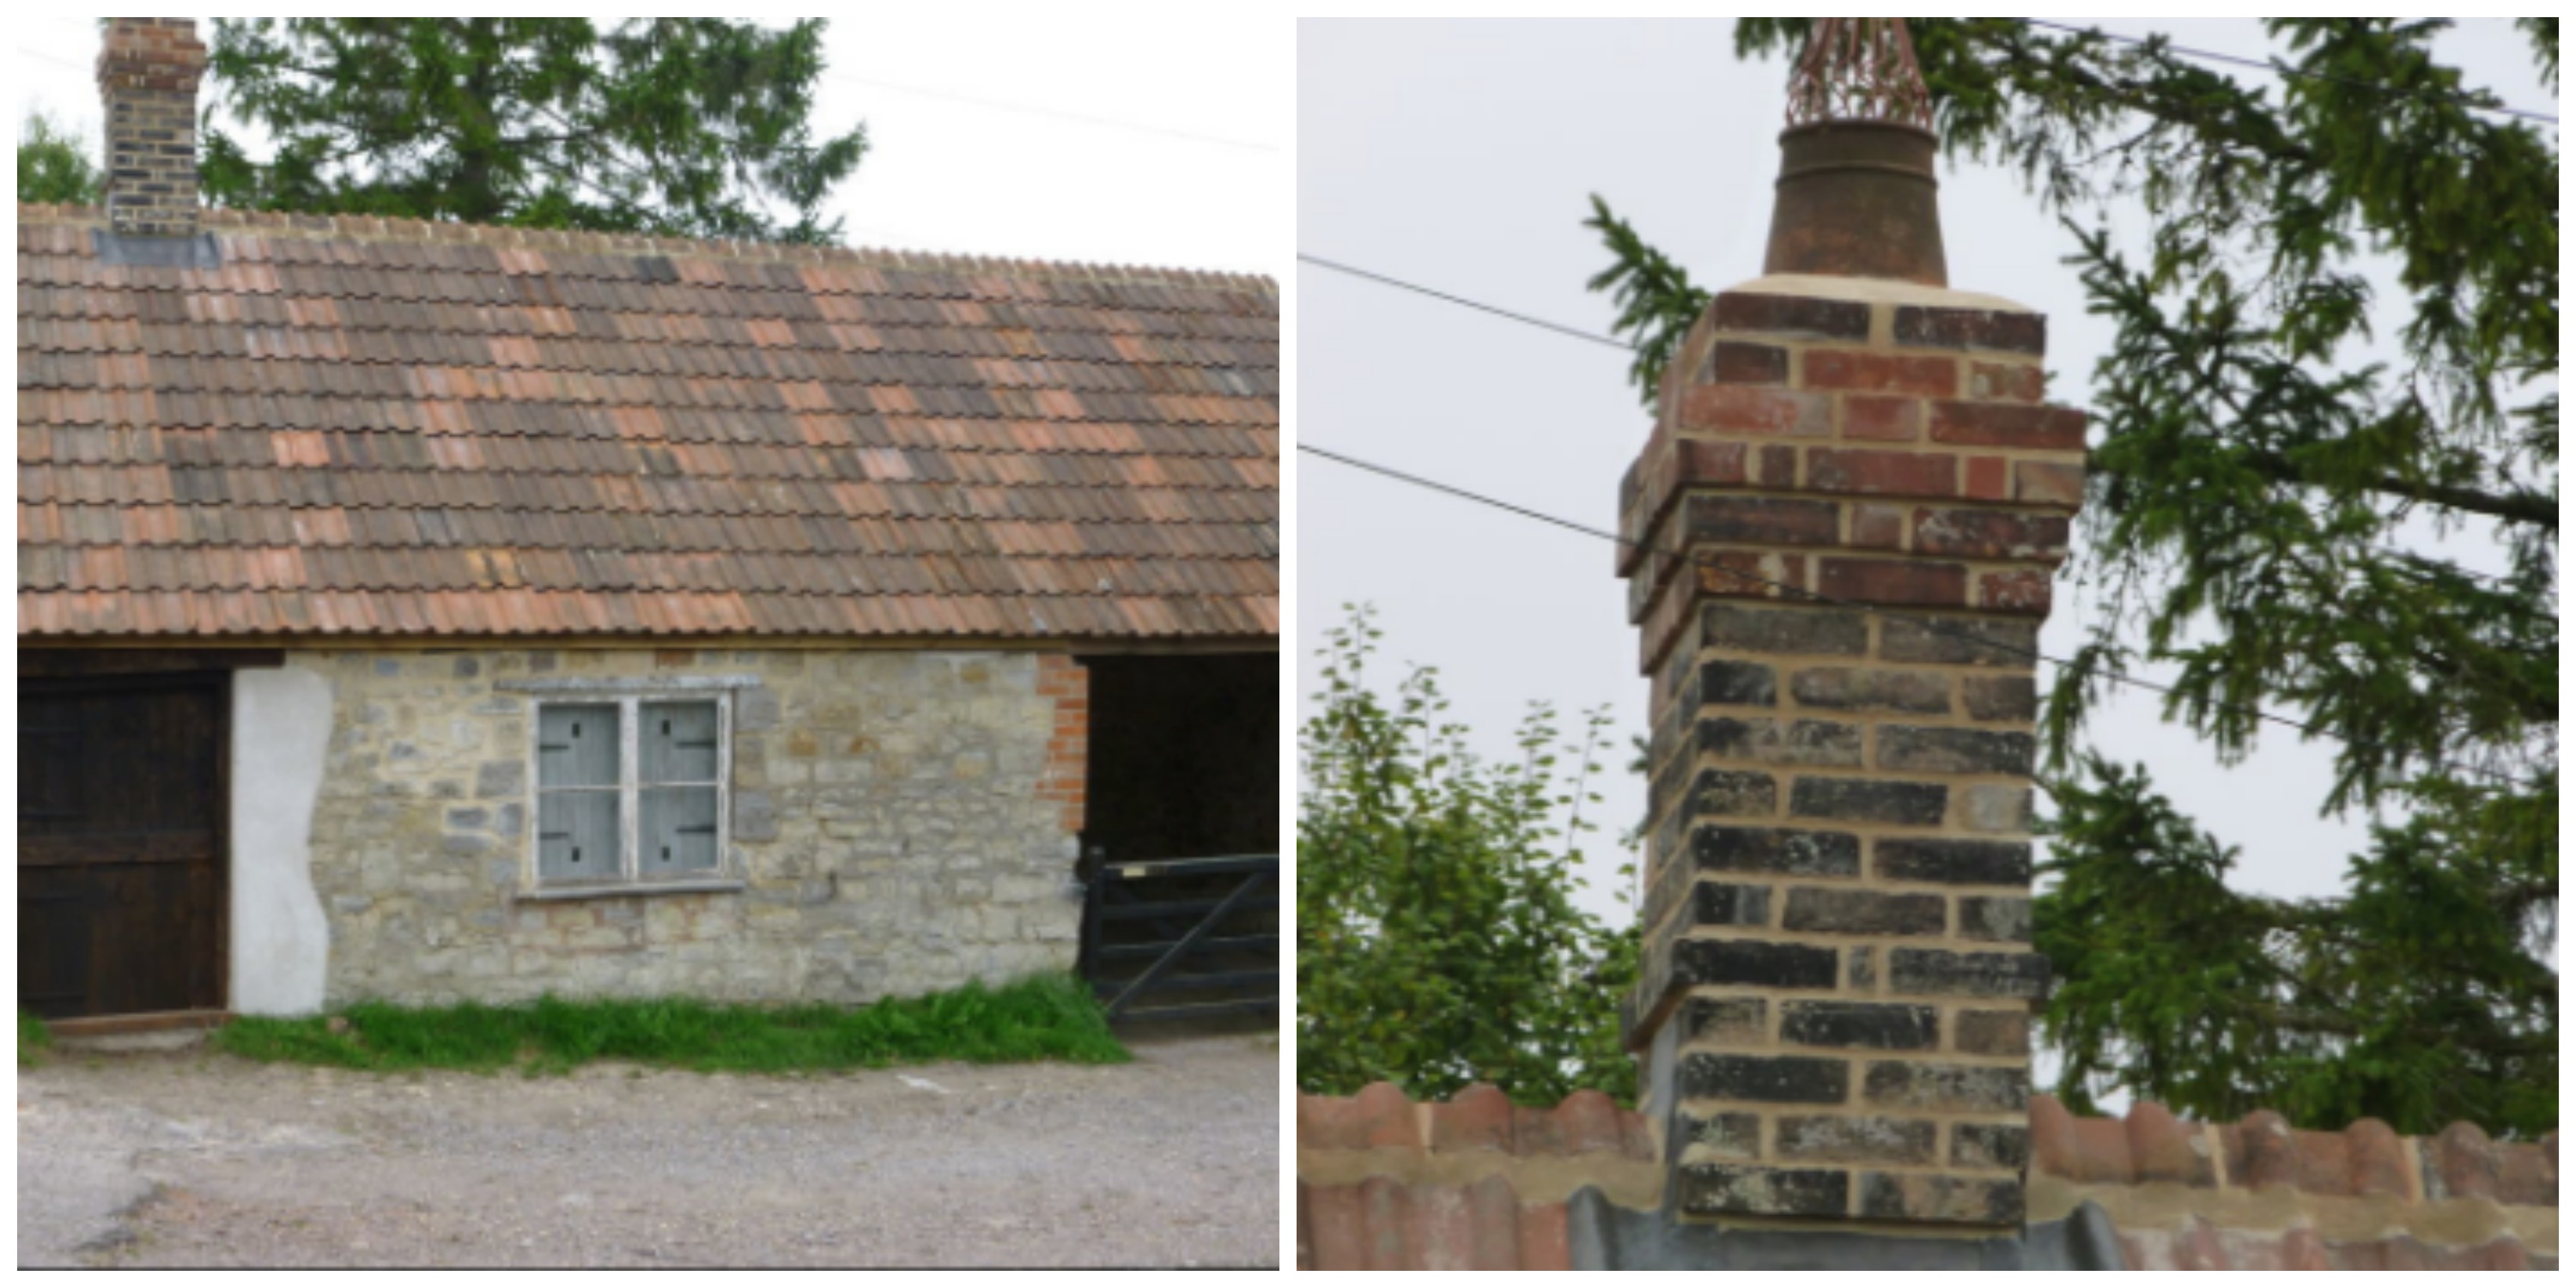 Re-Roof And Chimney Repair On A Historical Barn In Somerset